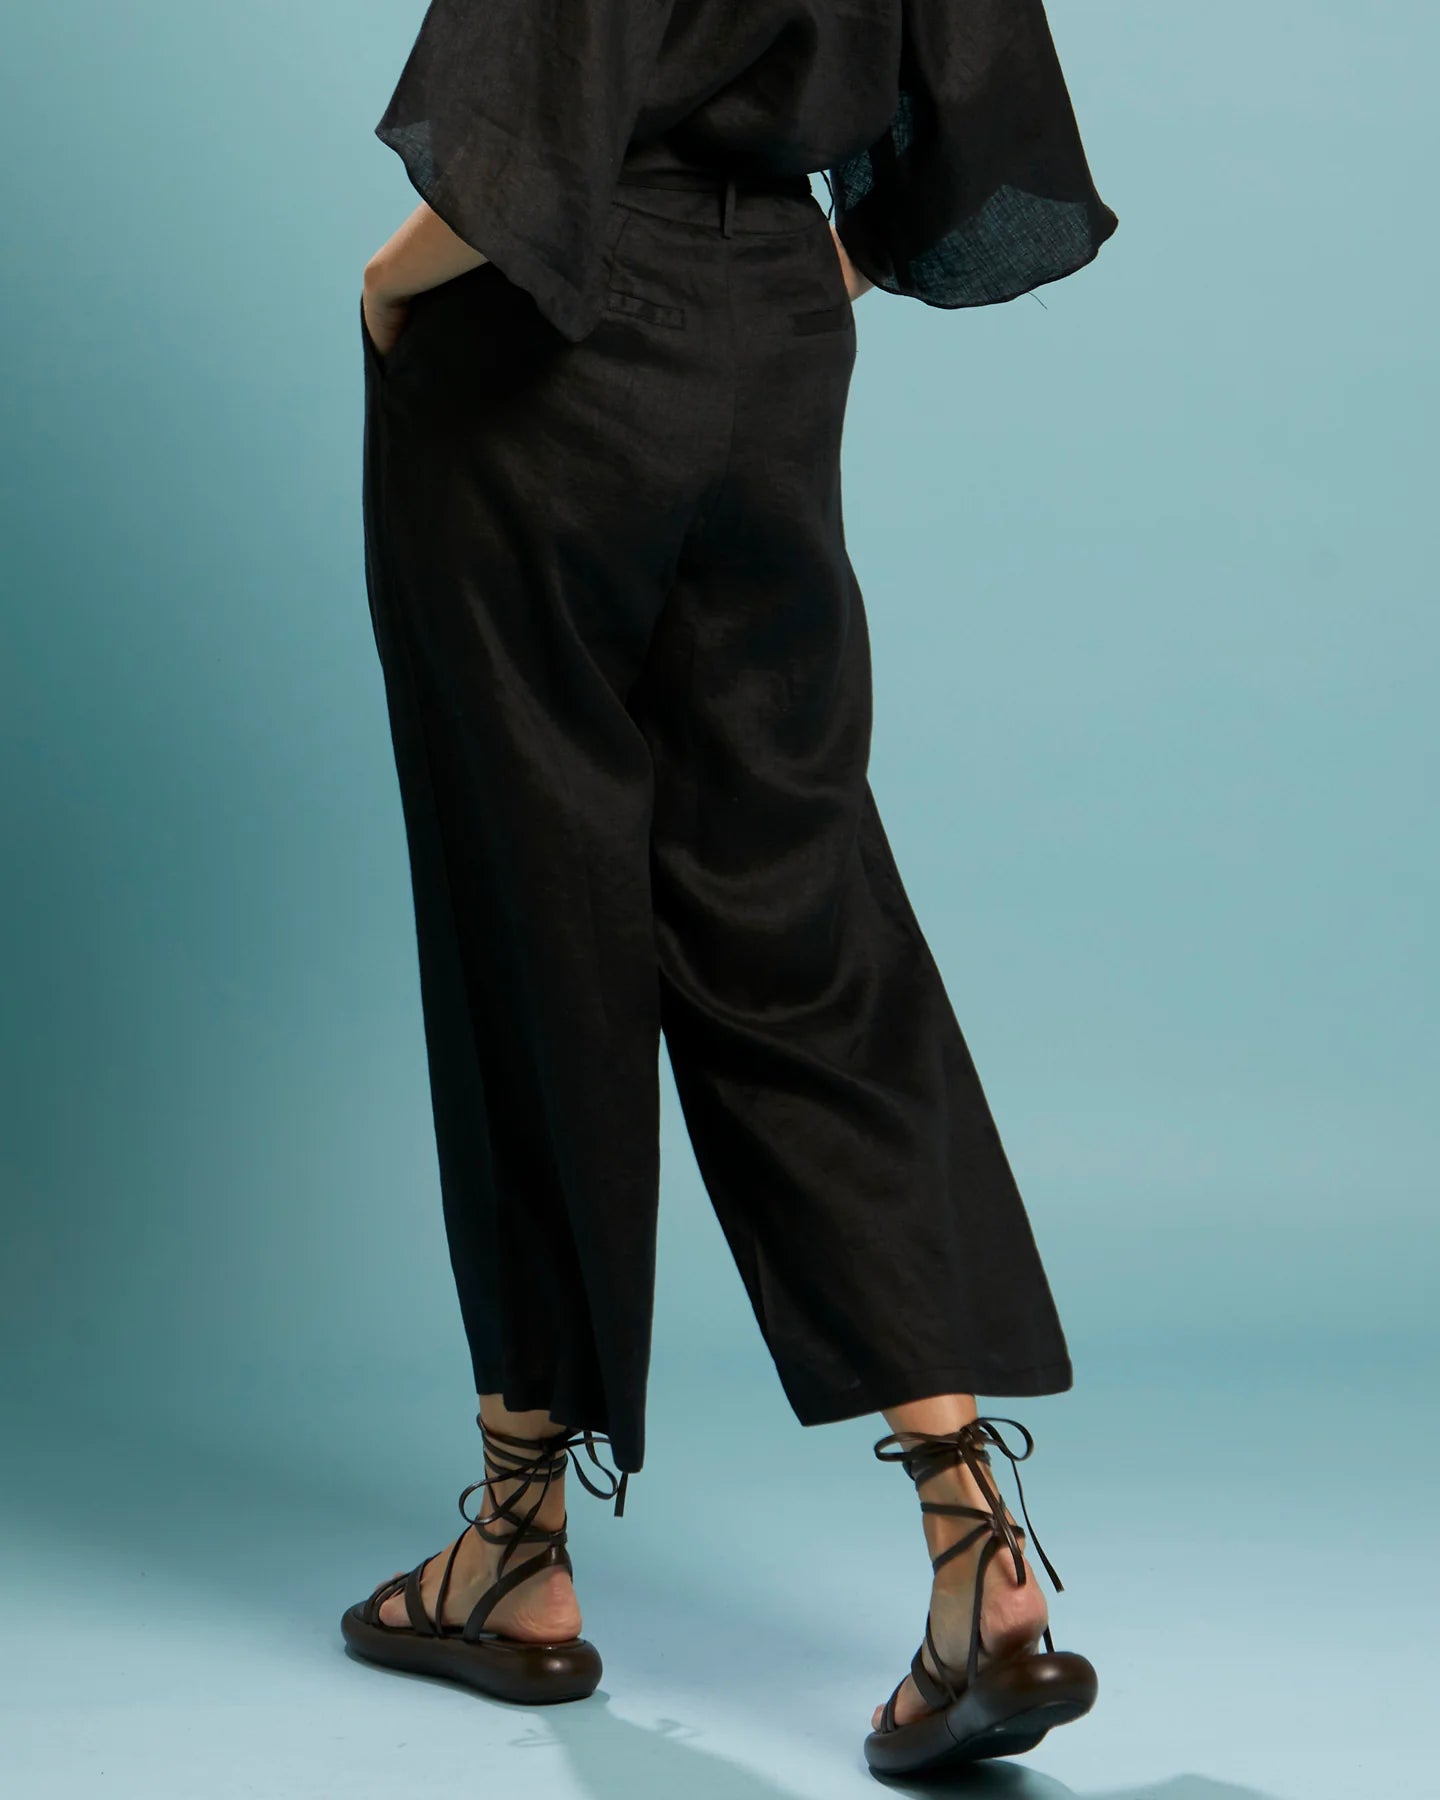 FATE+BECKER EXHALE BELTED WIDE LEG PANT BLACK